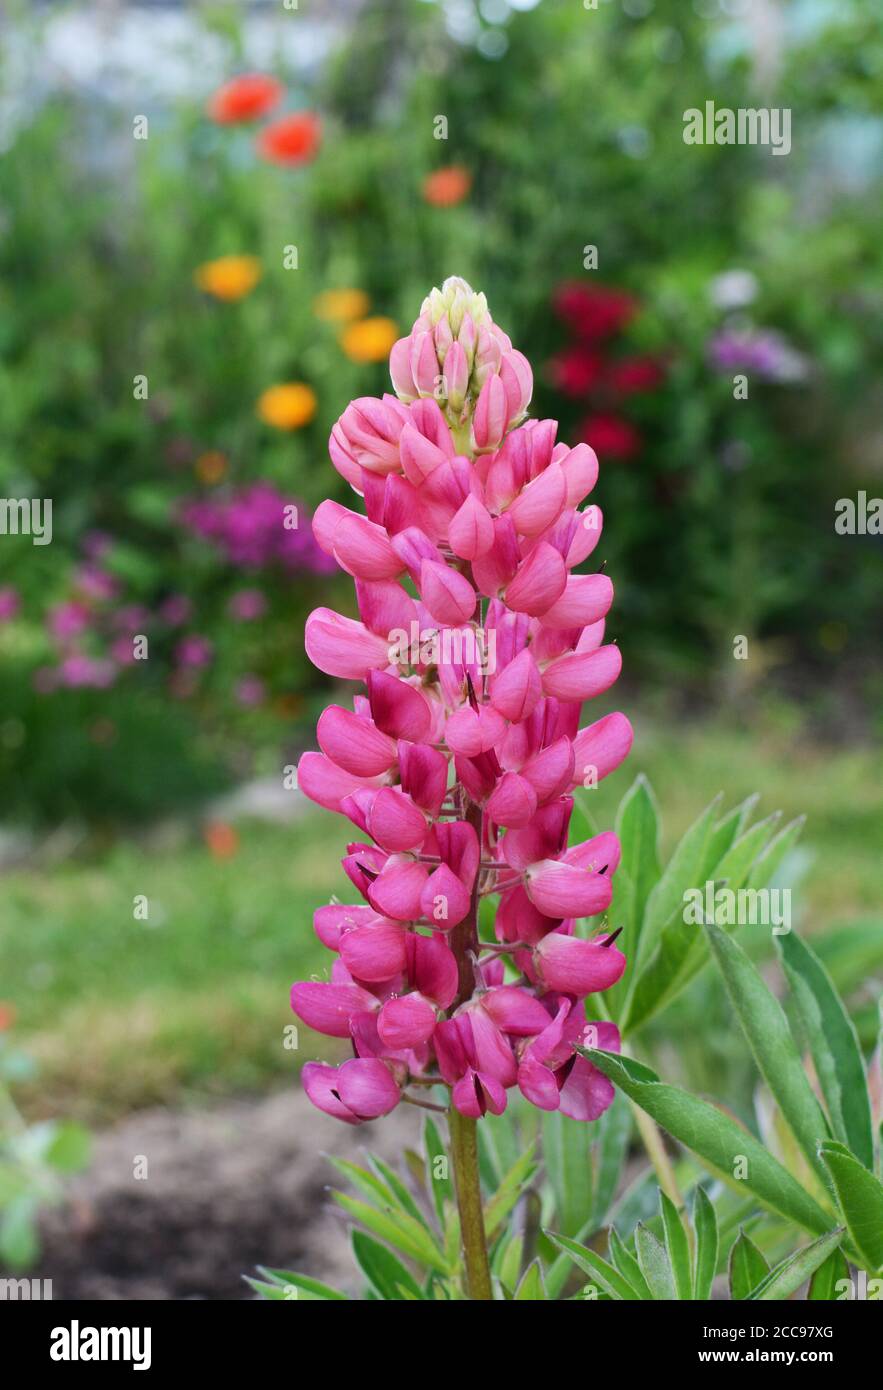 Pink lupin flowers, Lupinus Gallery Pink, blooming against a lush garden background Stock Photo